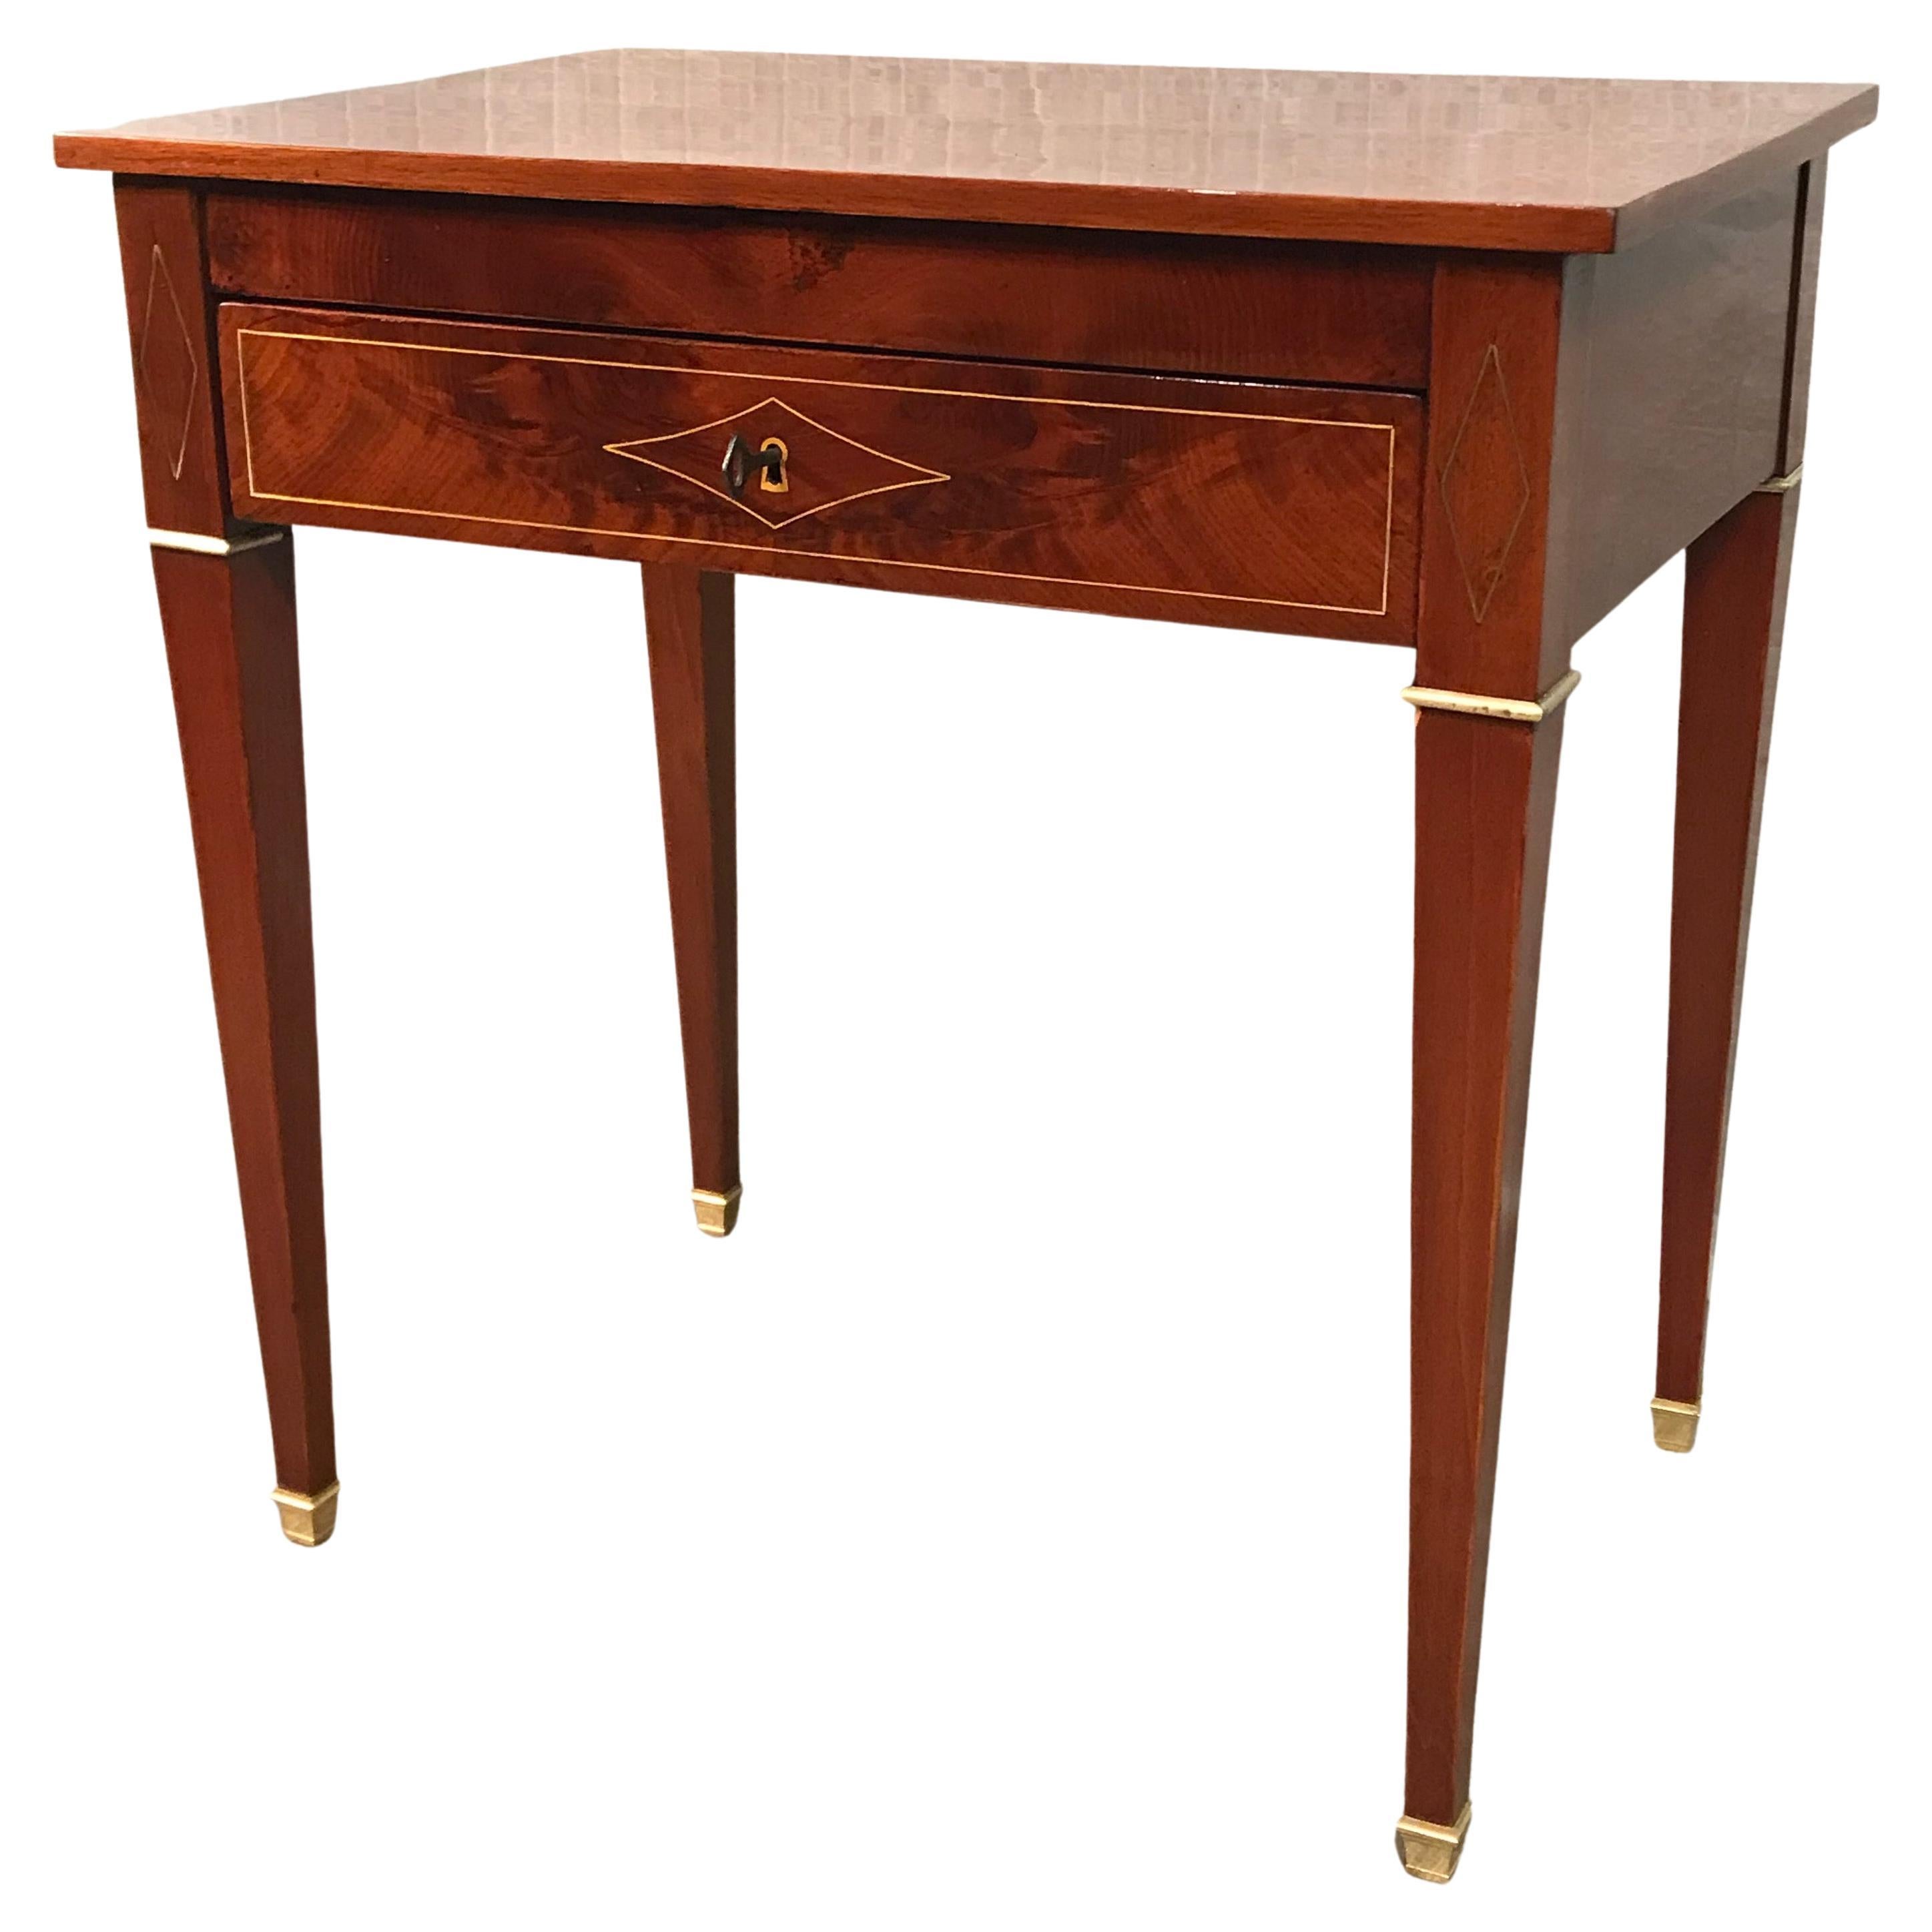 Small Neoclassical Desk, Northern Germany, 1810-20 In Good Condition For Sale In Belmont, MA